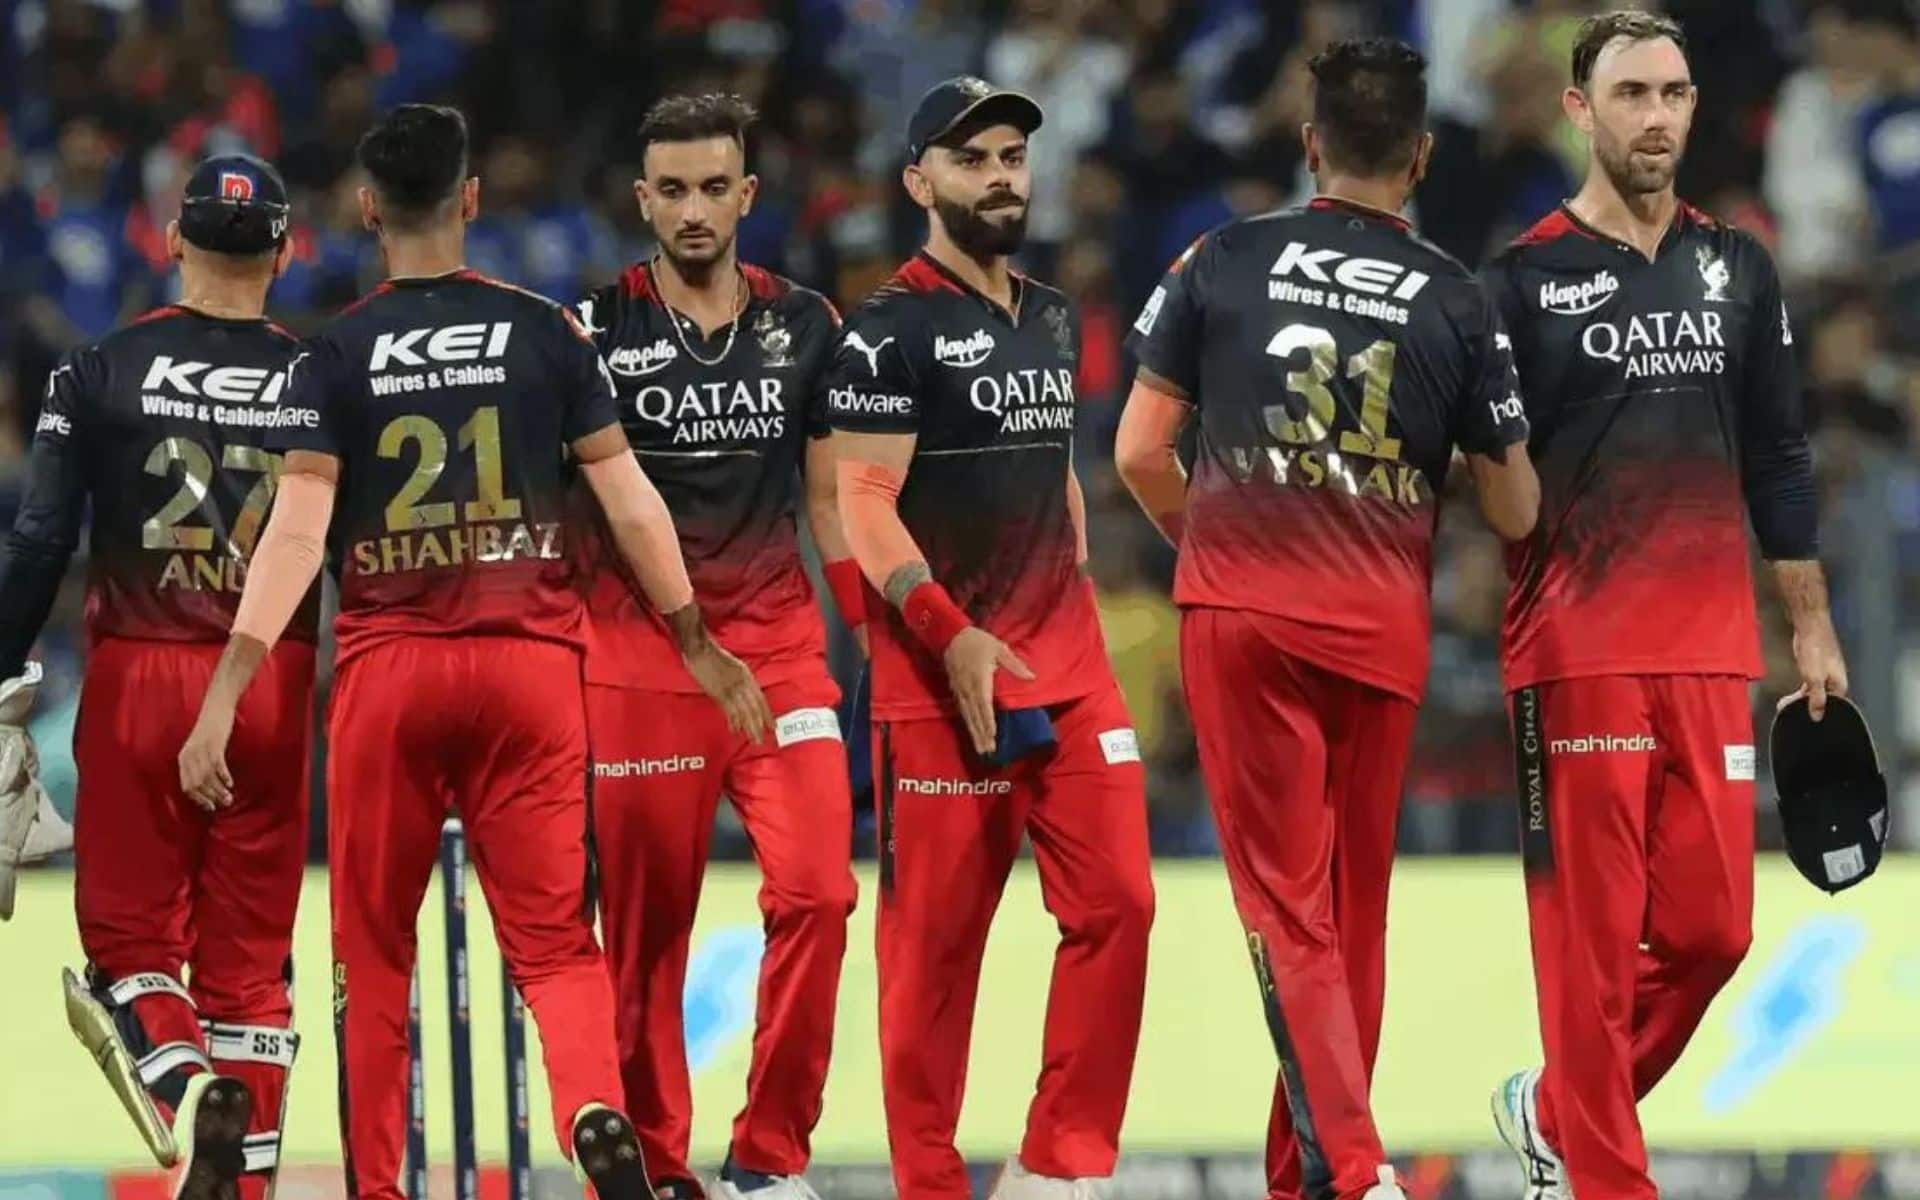 SZRoyal Challengers Bangalore boasts the highest team totals in IPL [x.com]